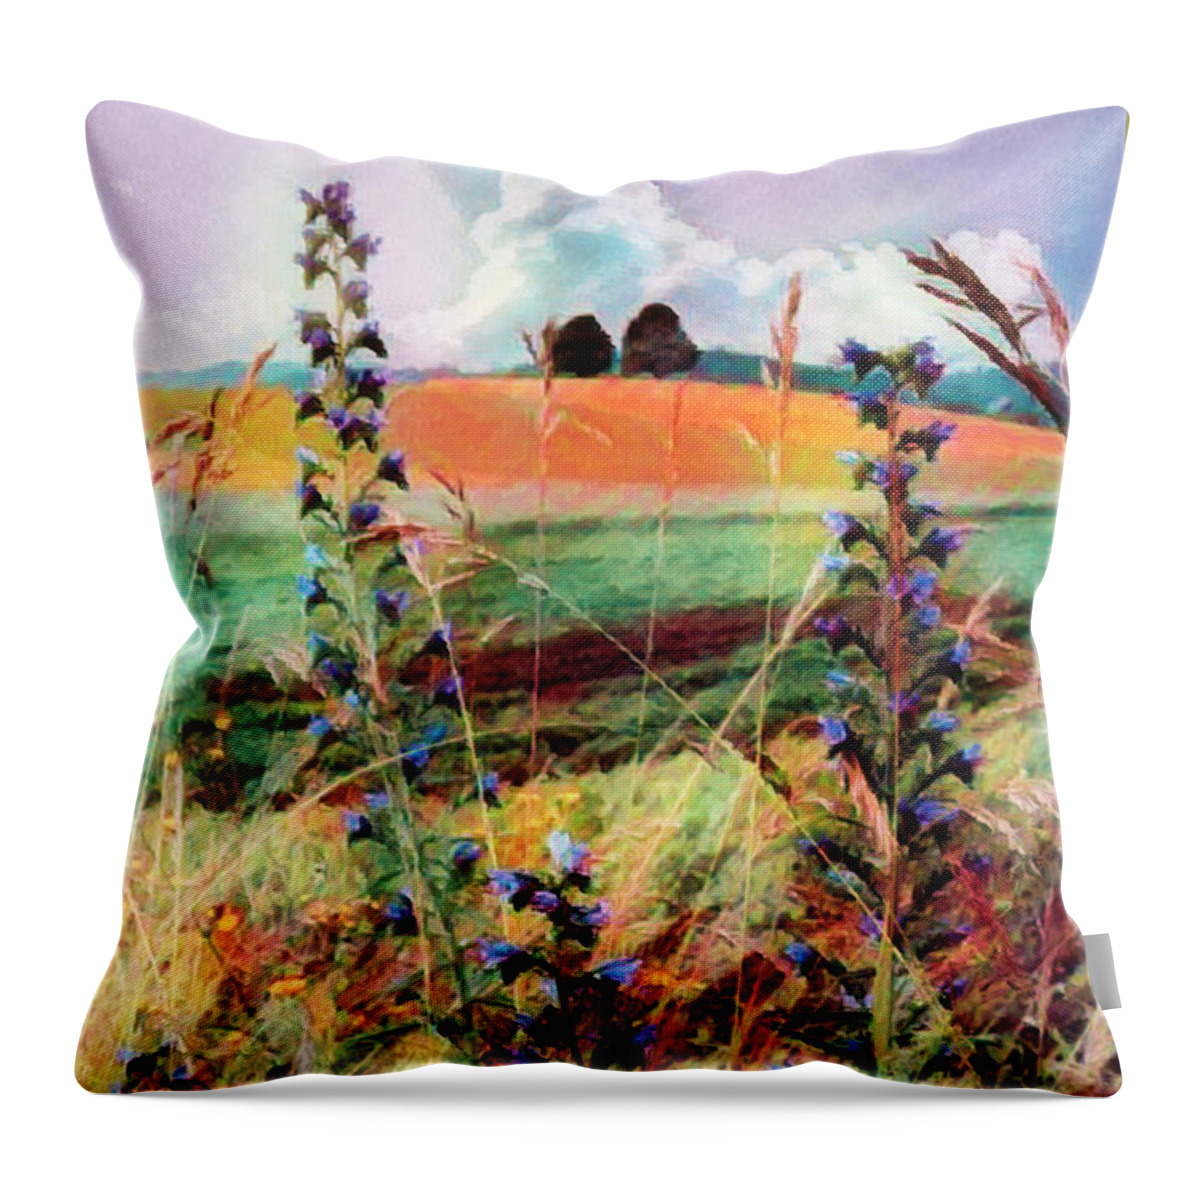 Clouds Throw Pillow featuring the photograph Country Wildflowers Painting by Debra and Dave Vanderlaan